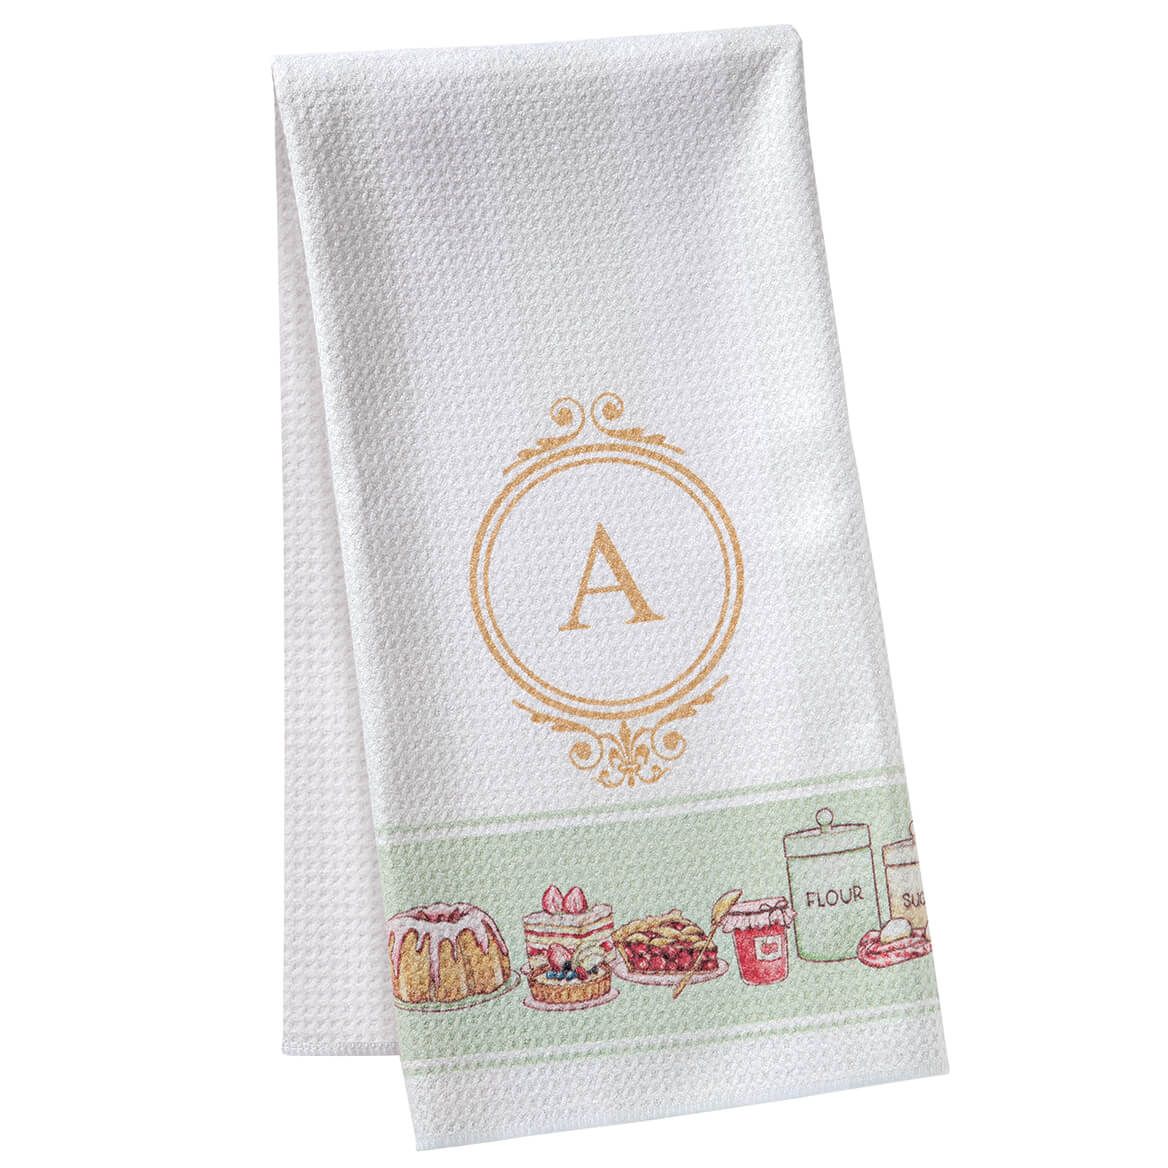 Personalized Nostalgic Dessert Towel by Home Marketplace + '-' + 376612